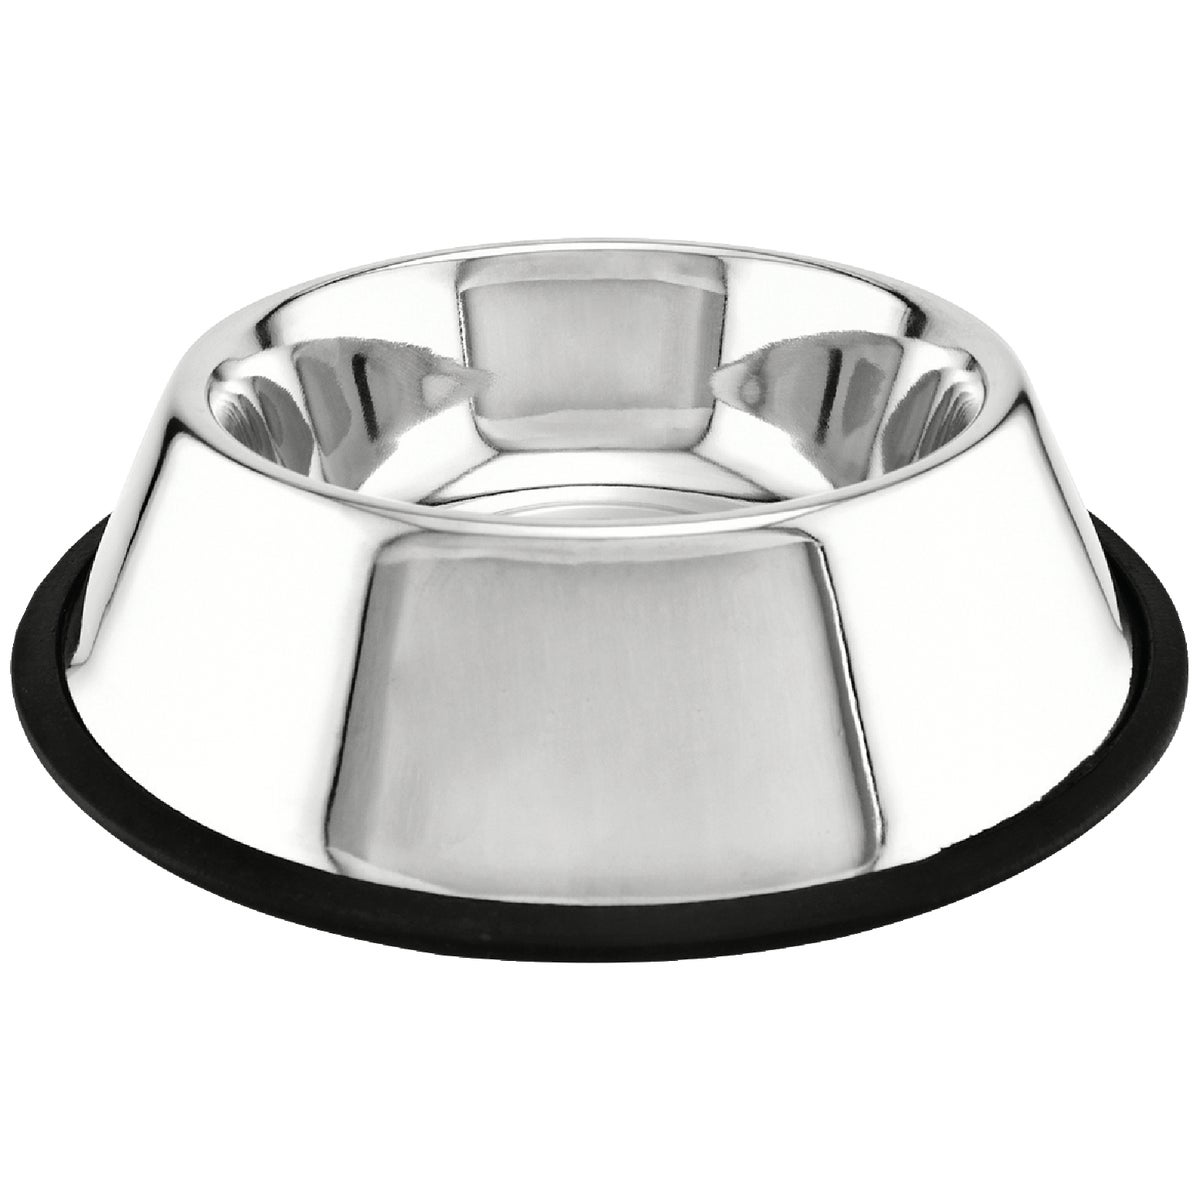 Item 810527, Non-skid stainless steel pet food bowl. Ideal for dogs or cats.